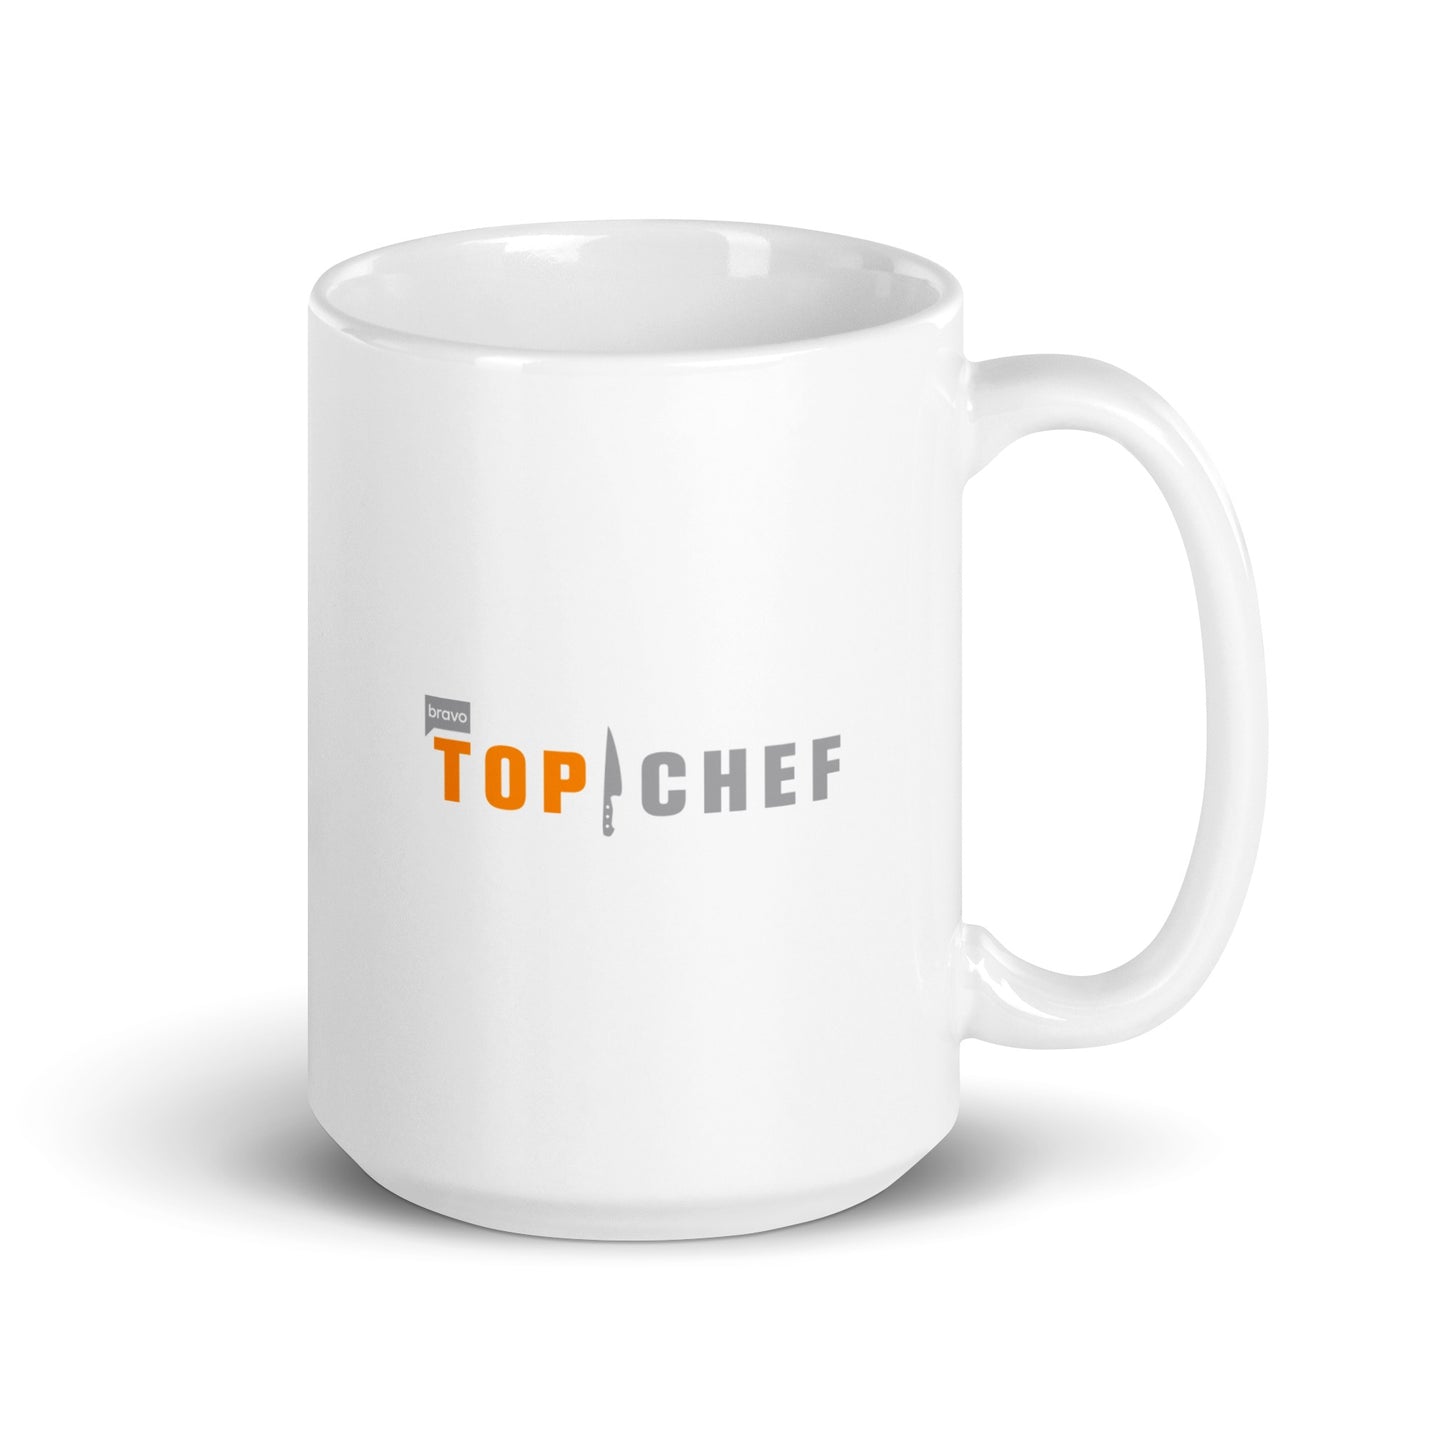 Top Chef Nutrition Facts Mug